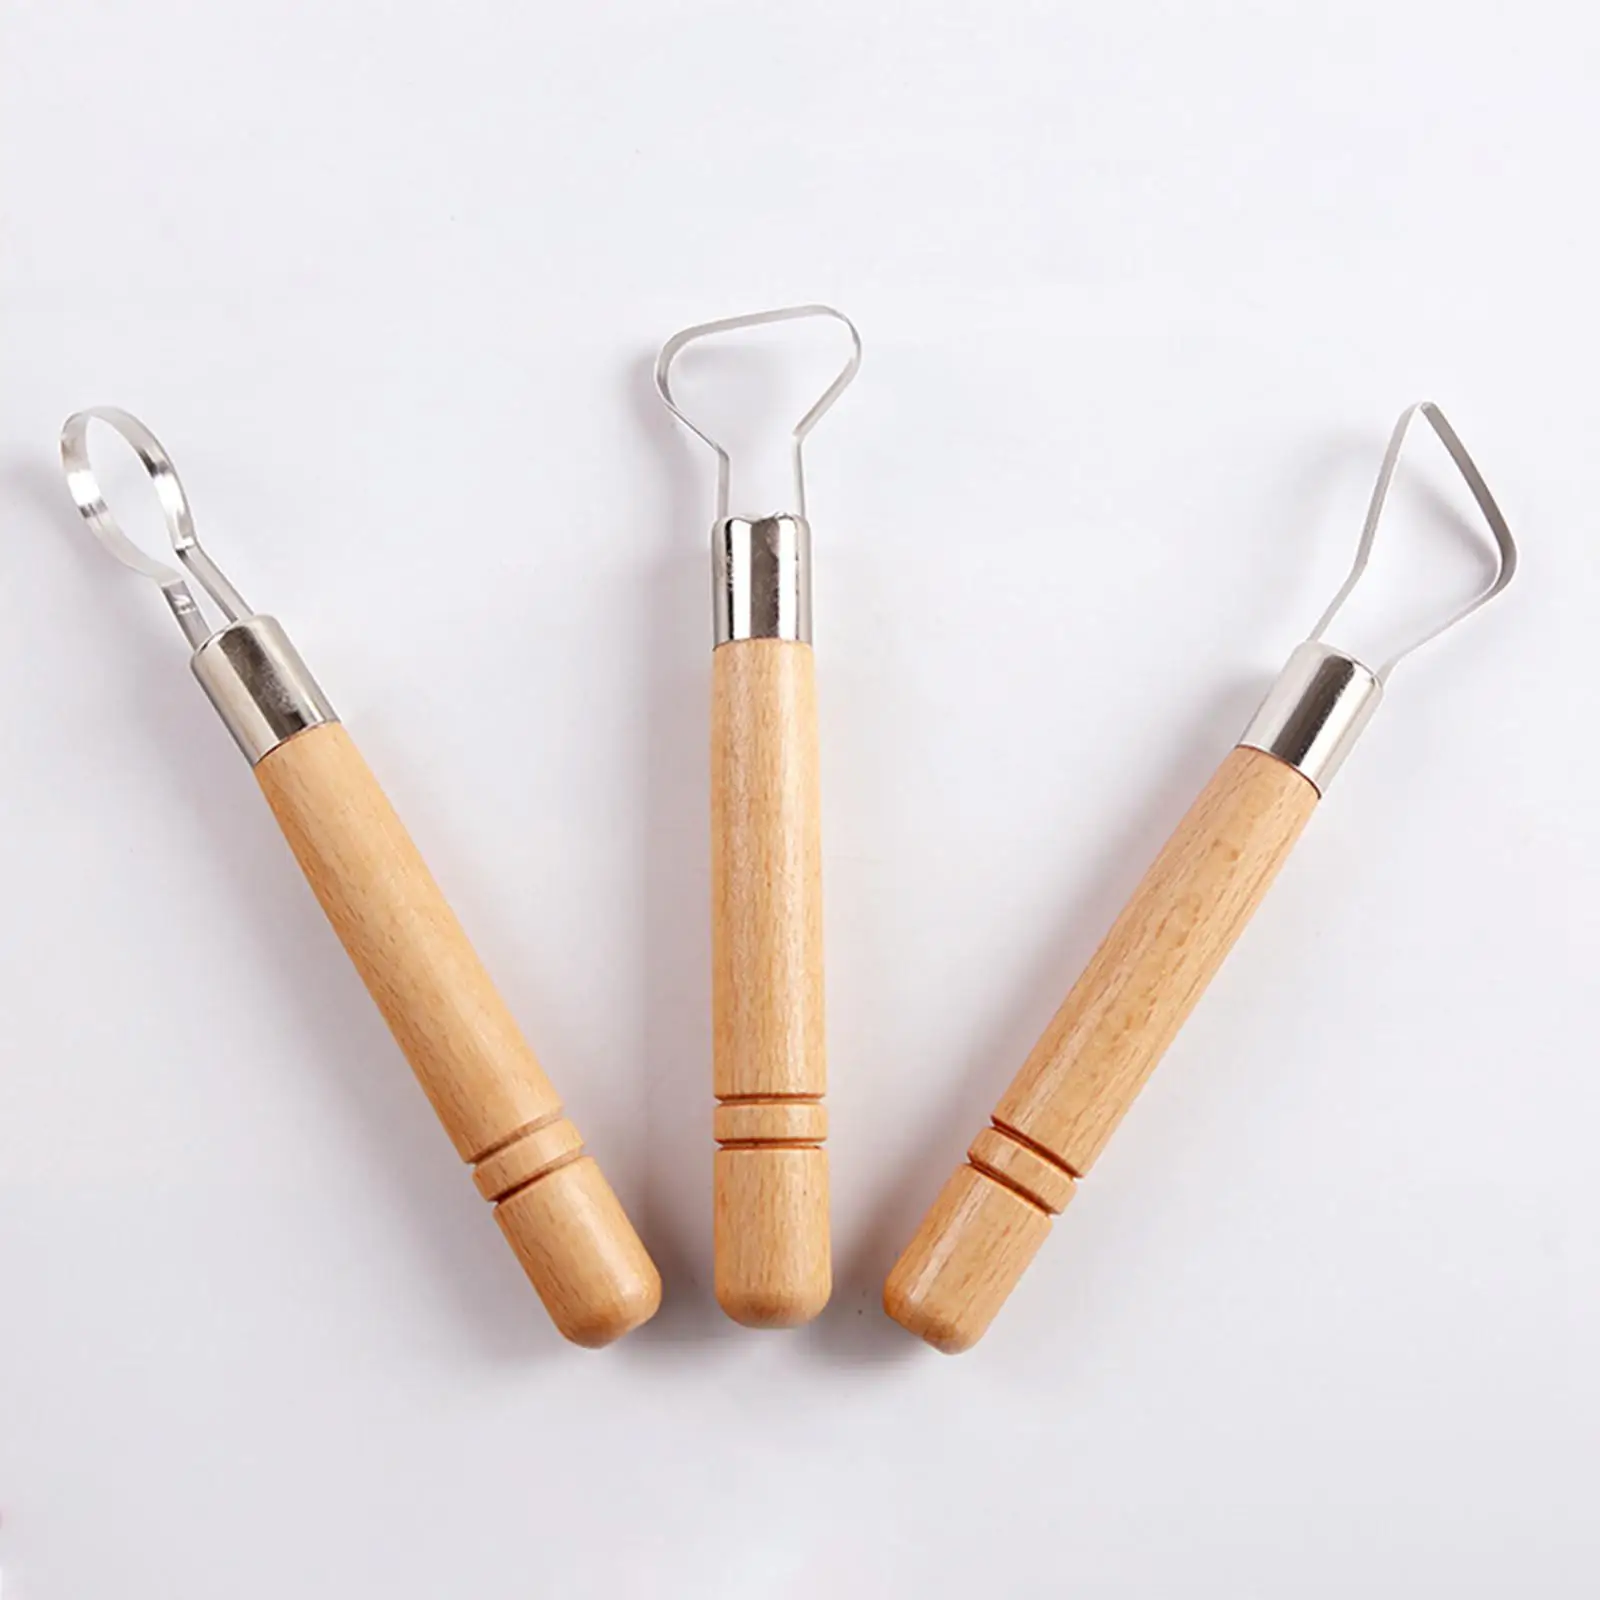 3x Clay Pottery  Carving  Ceramic Craft  Shaping Texture Tools for Beginners Artists